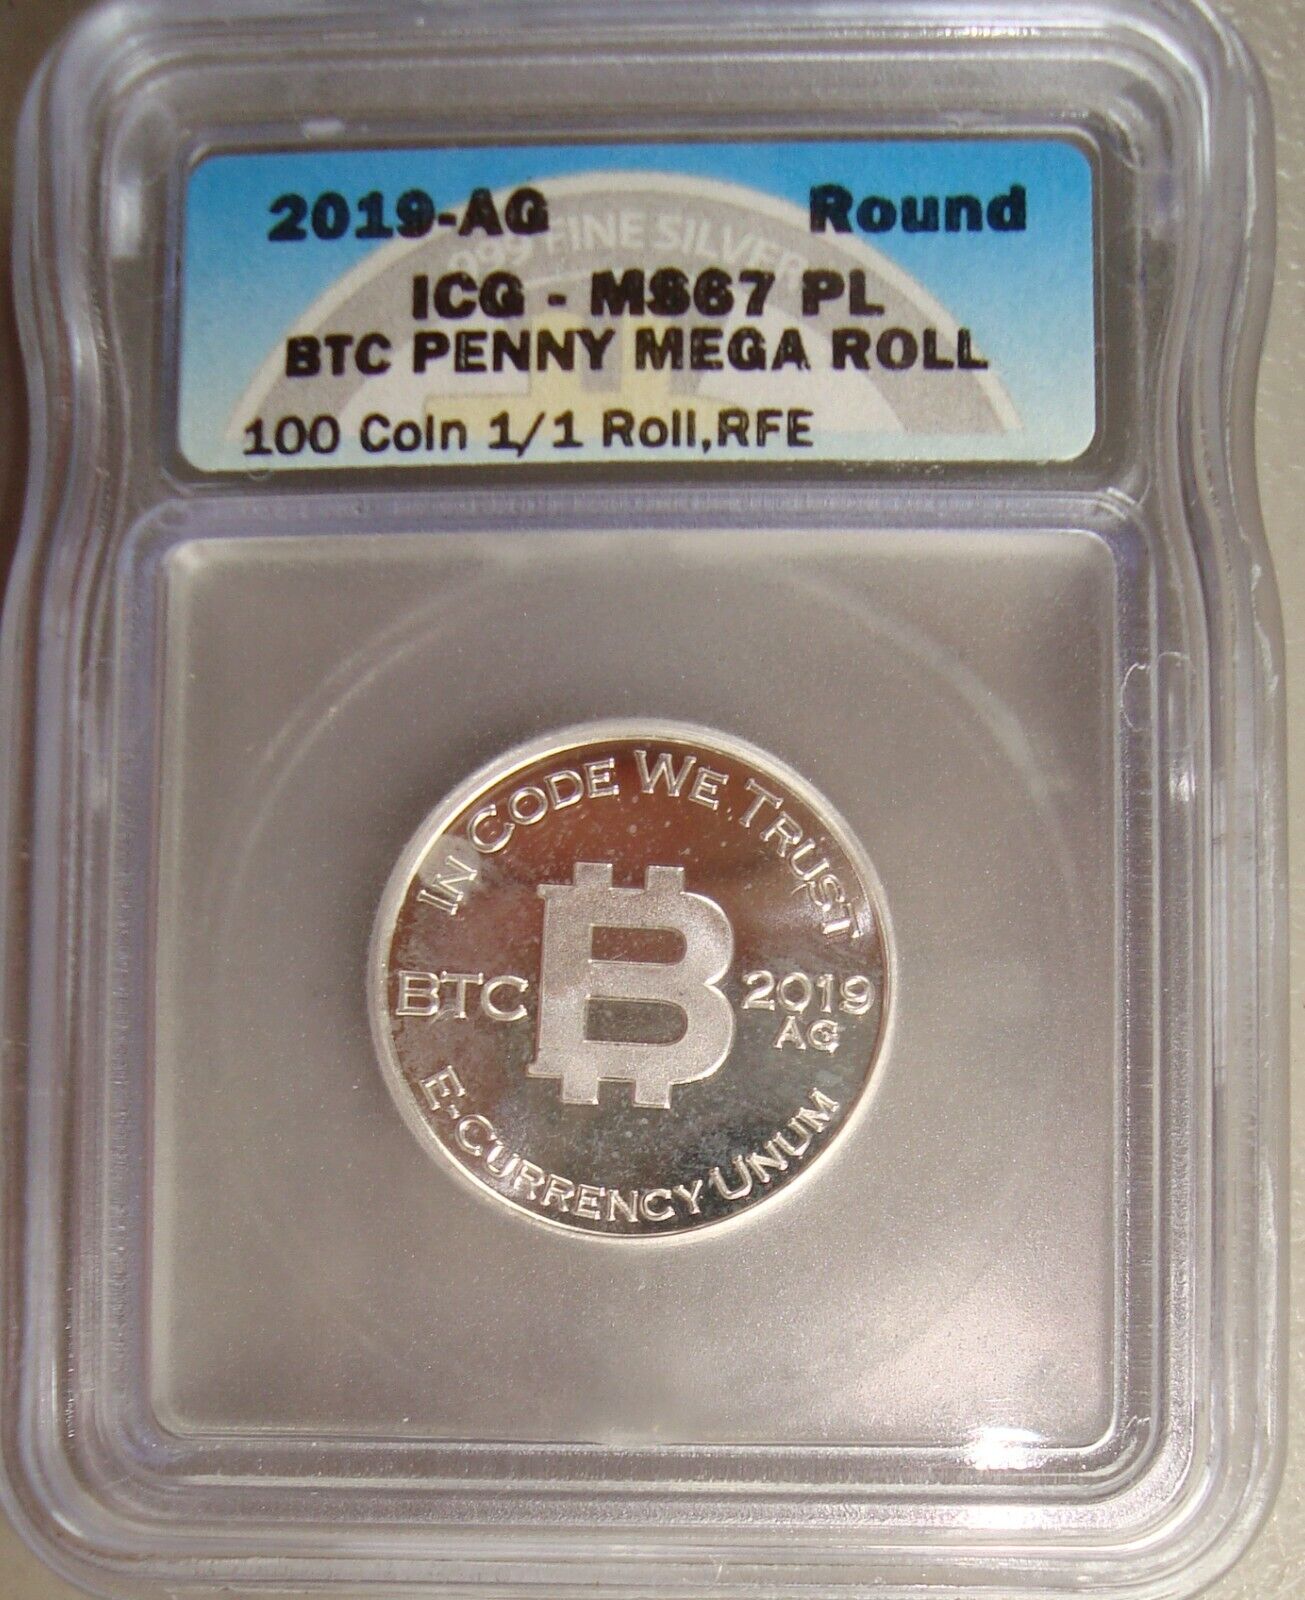 2019-AG Bitcoin Penny, Eagle Right - 700 Mintage 1/4 oz .999 Silver ICG MS67PL